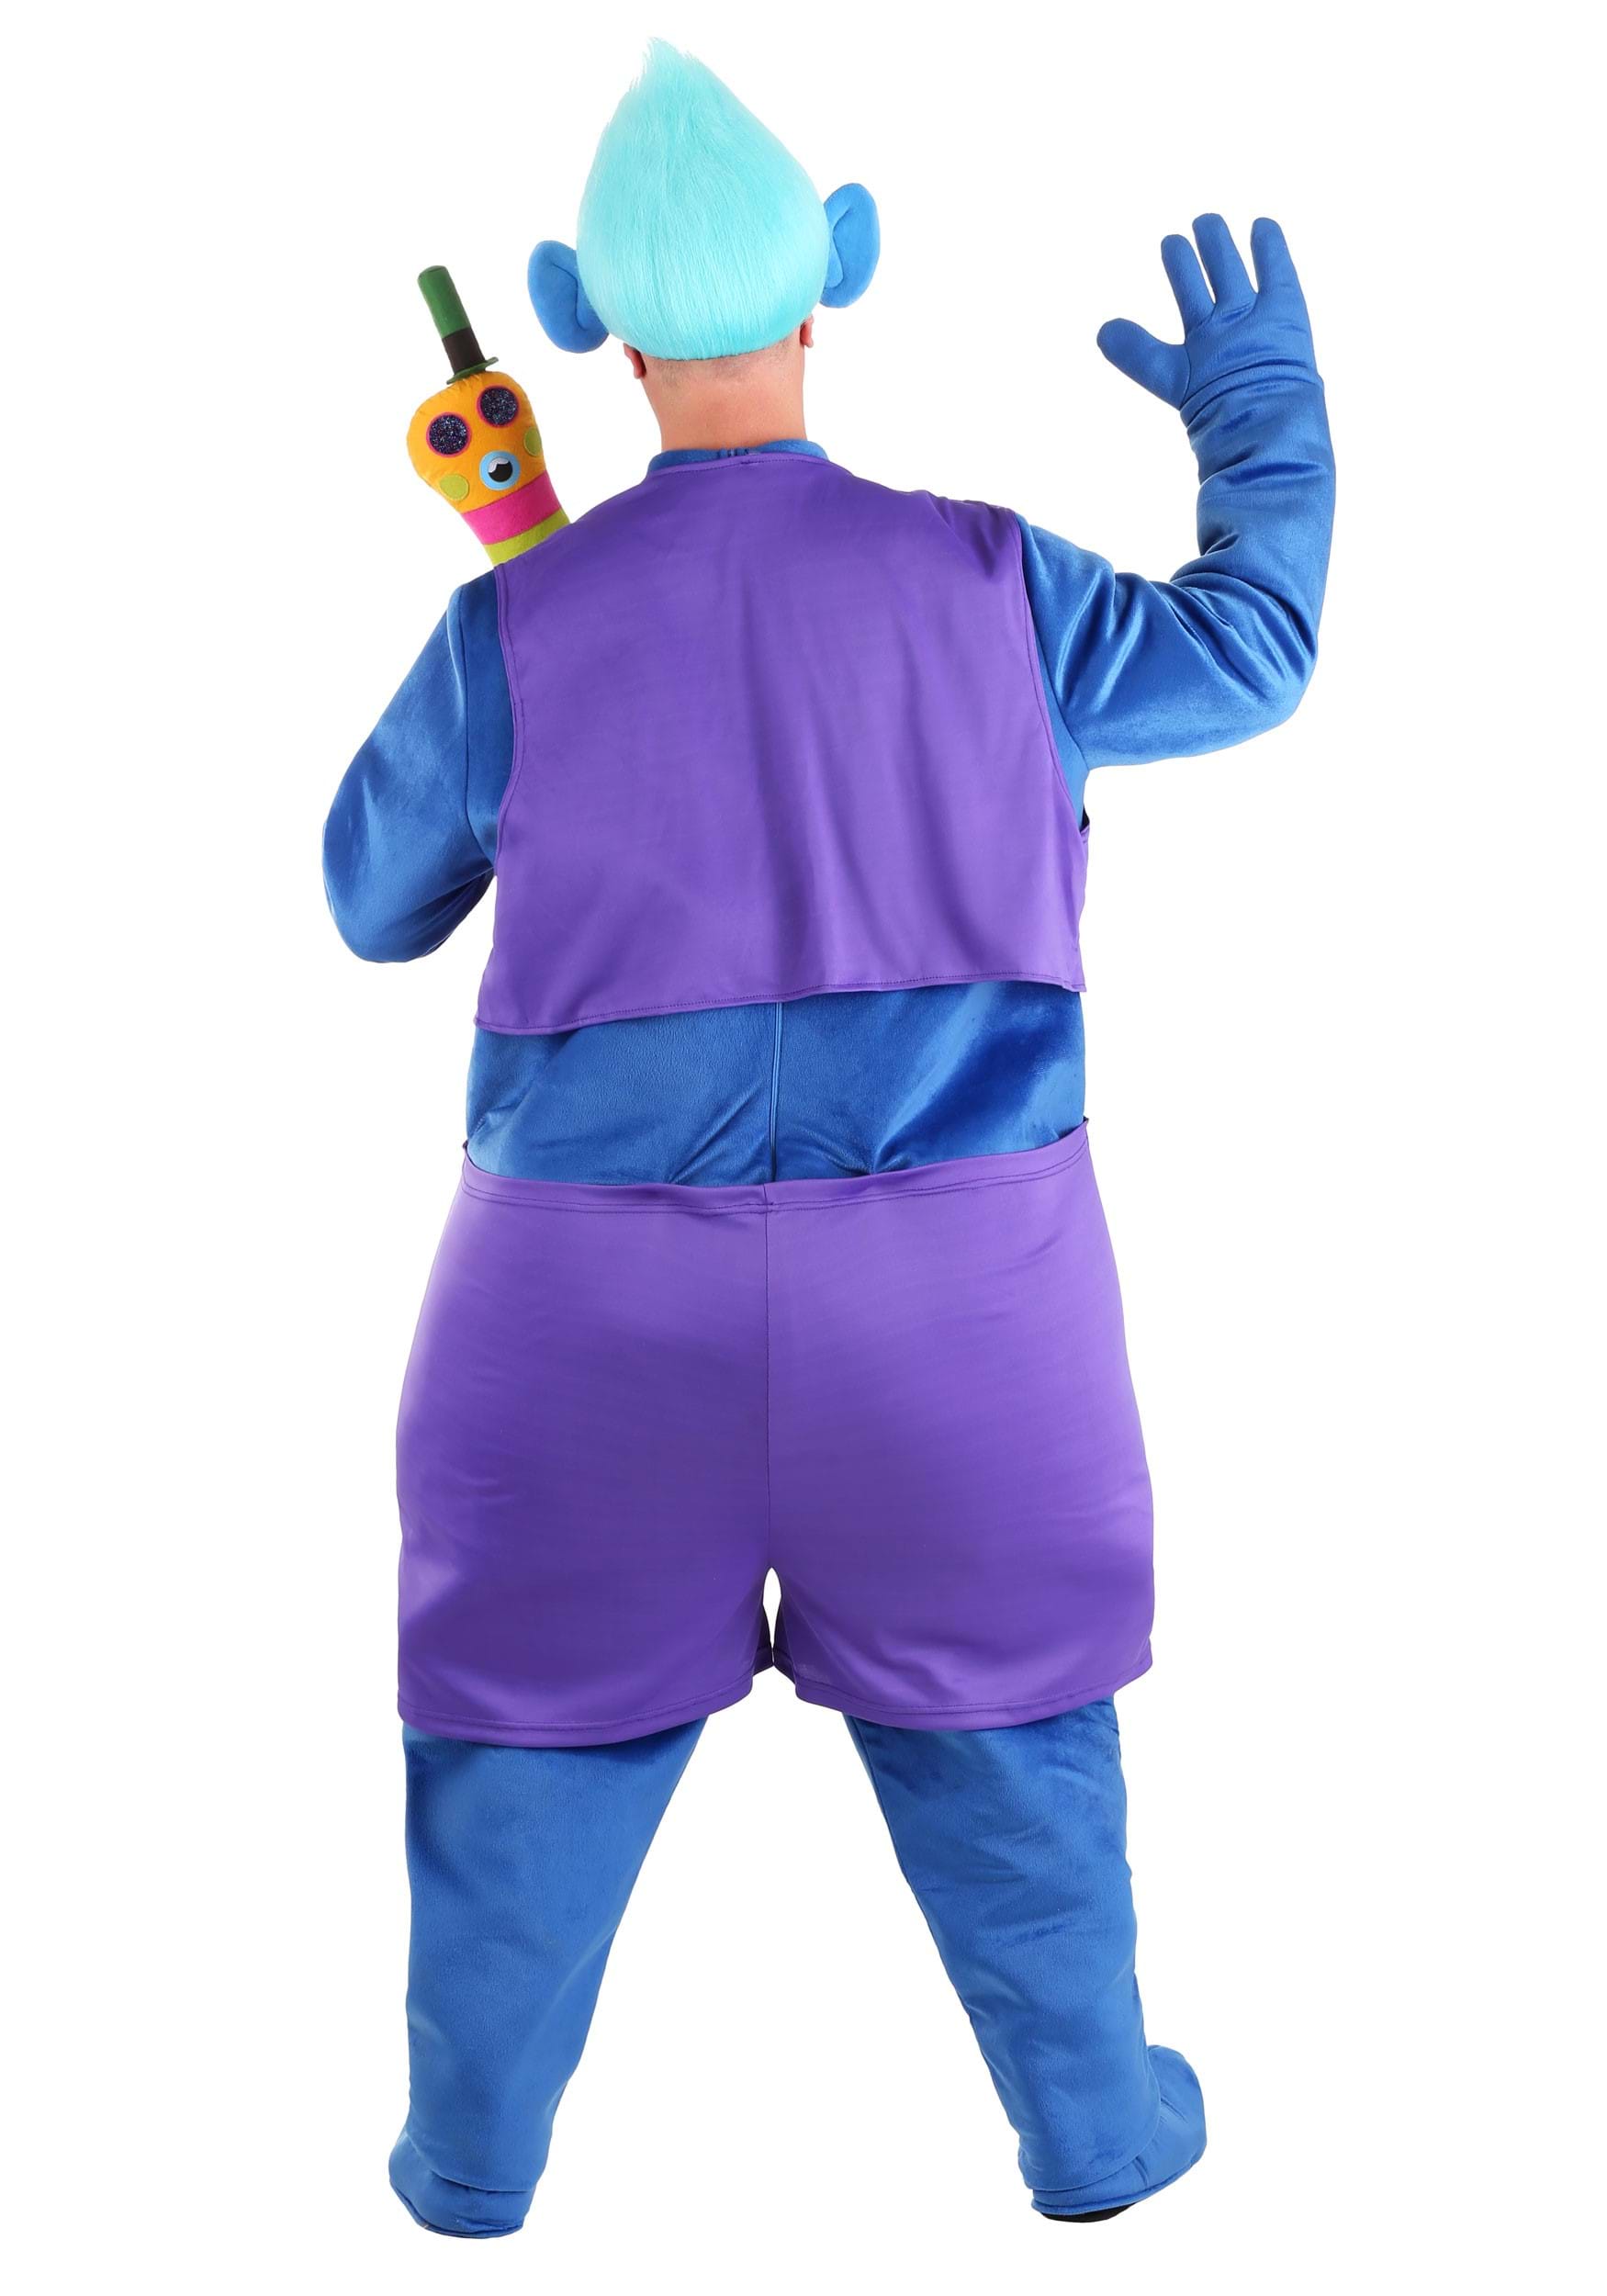 Biggie Costume from Trolls for Plus Size Adults